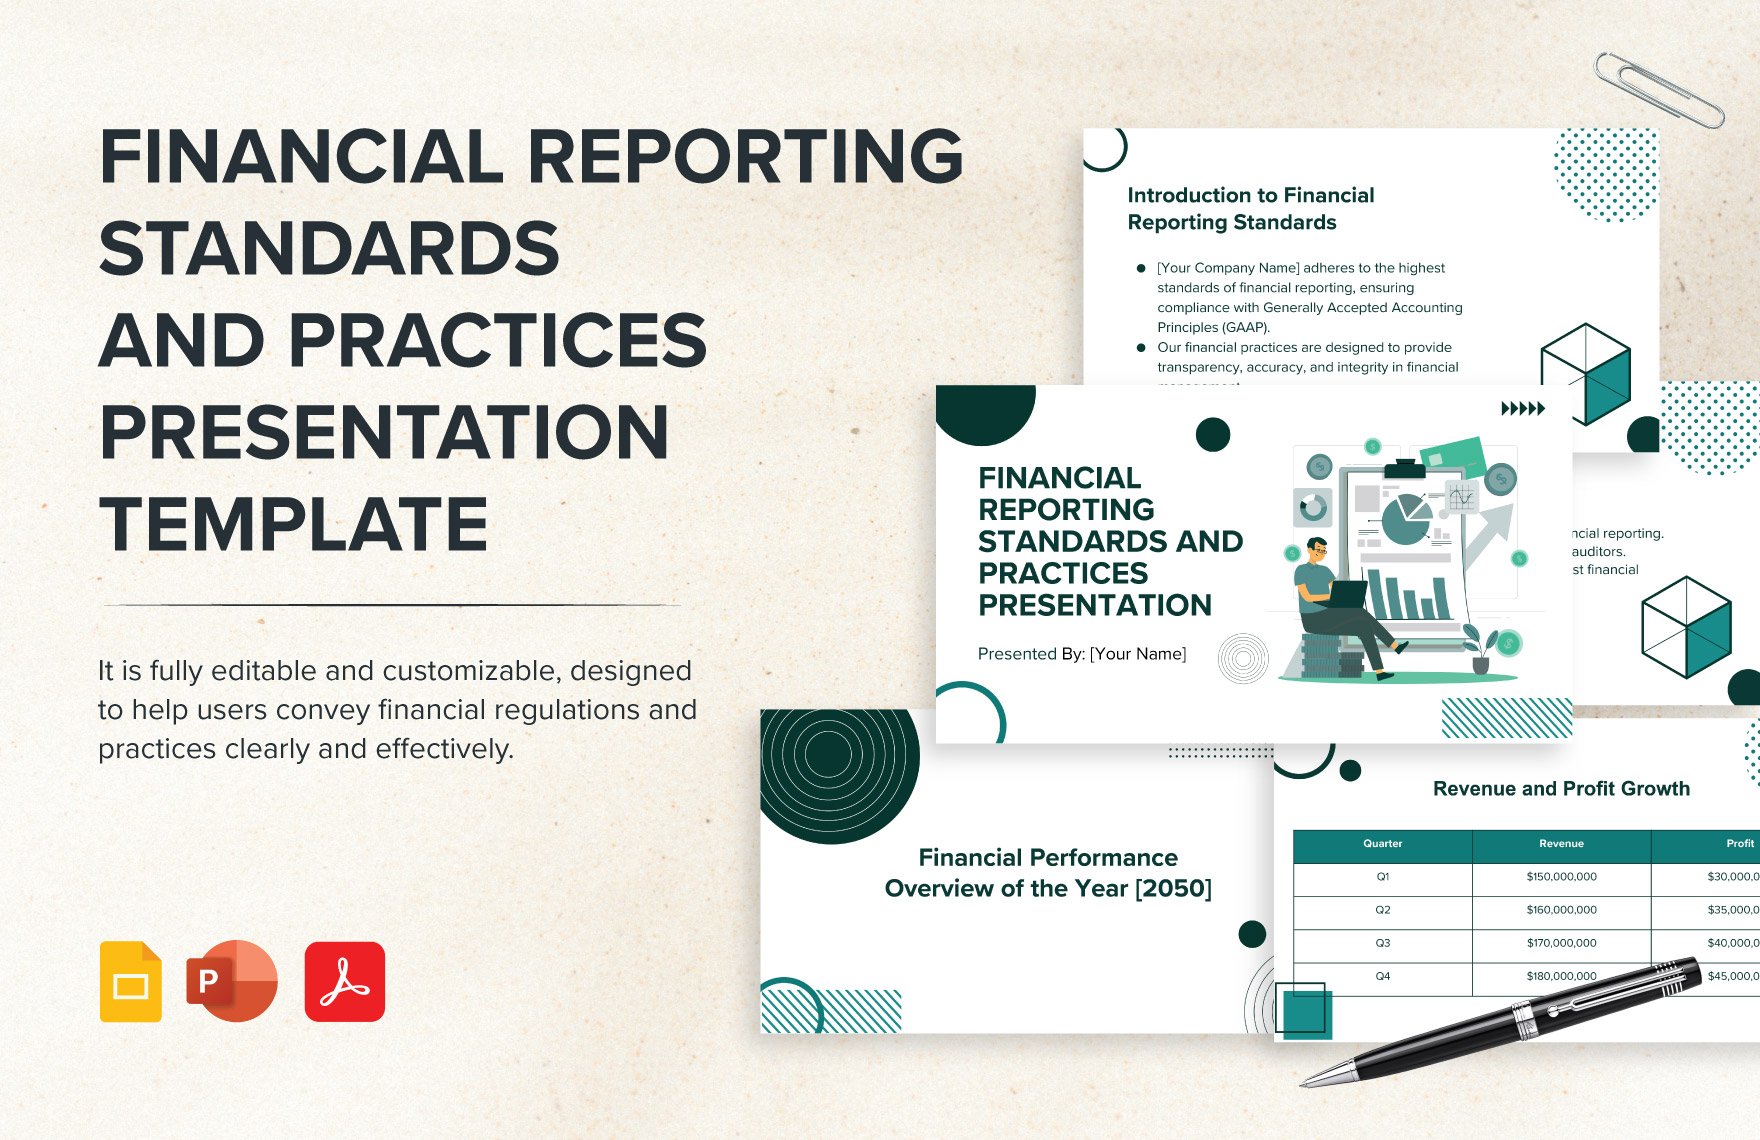 Free Financial Reporting Standards and Practices Presentation Template in PDF, PowerPoint, Google Slides